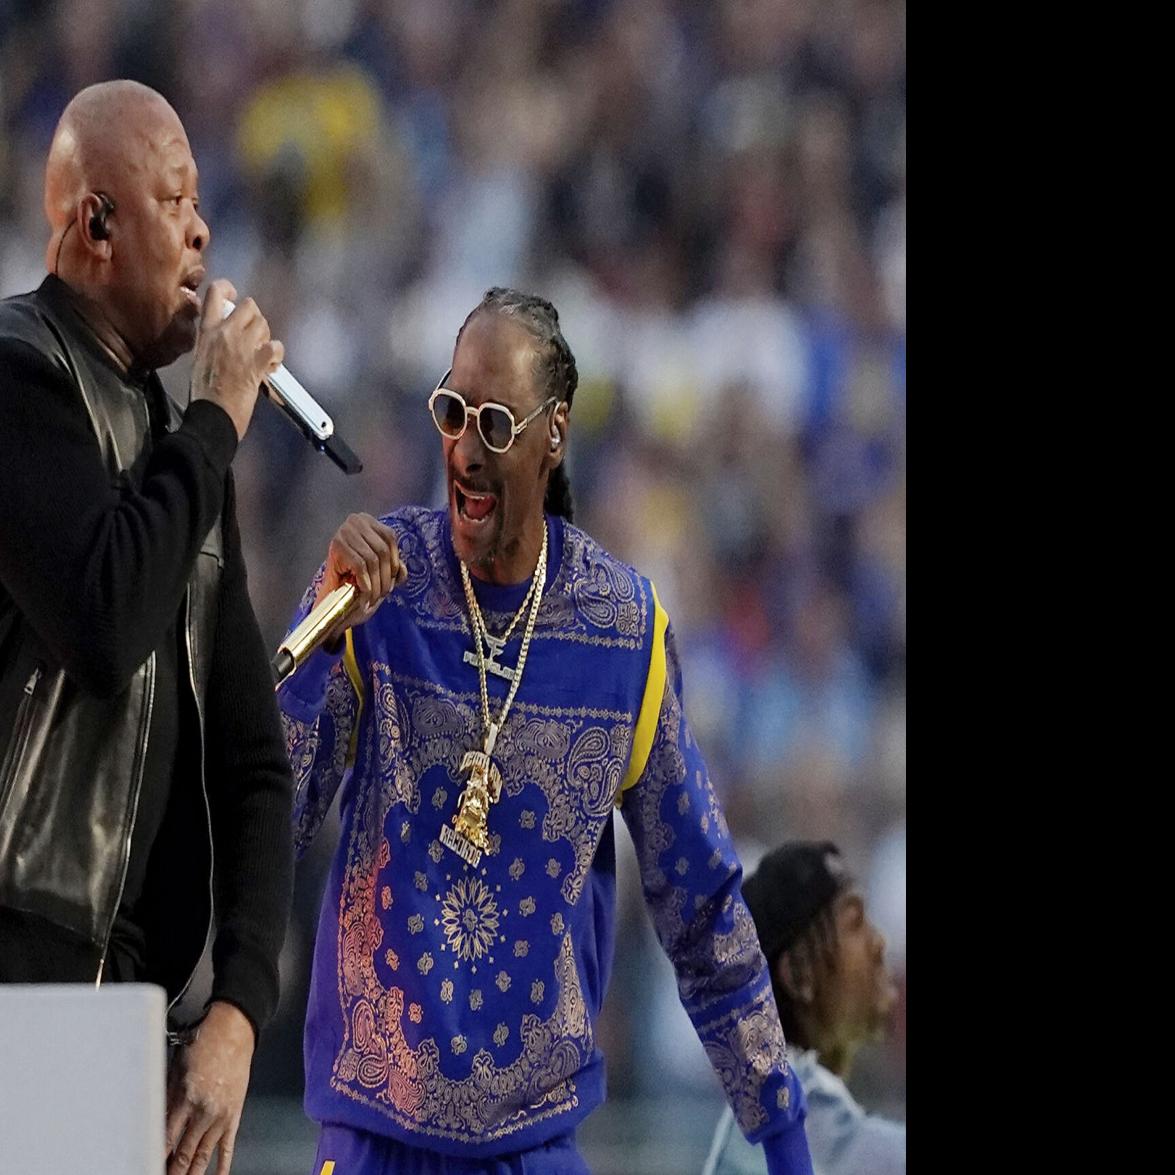 Super Bowl: Dr Dre and Eminem pack in the hits at half-time show